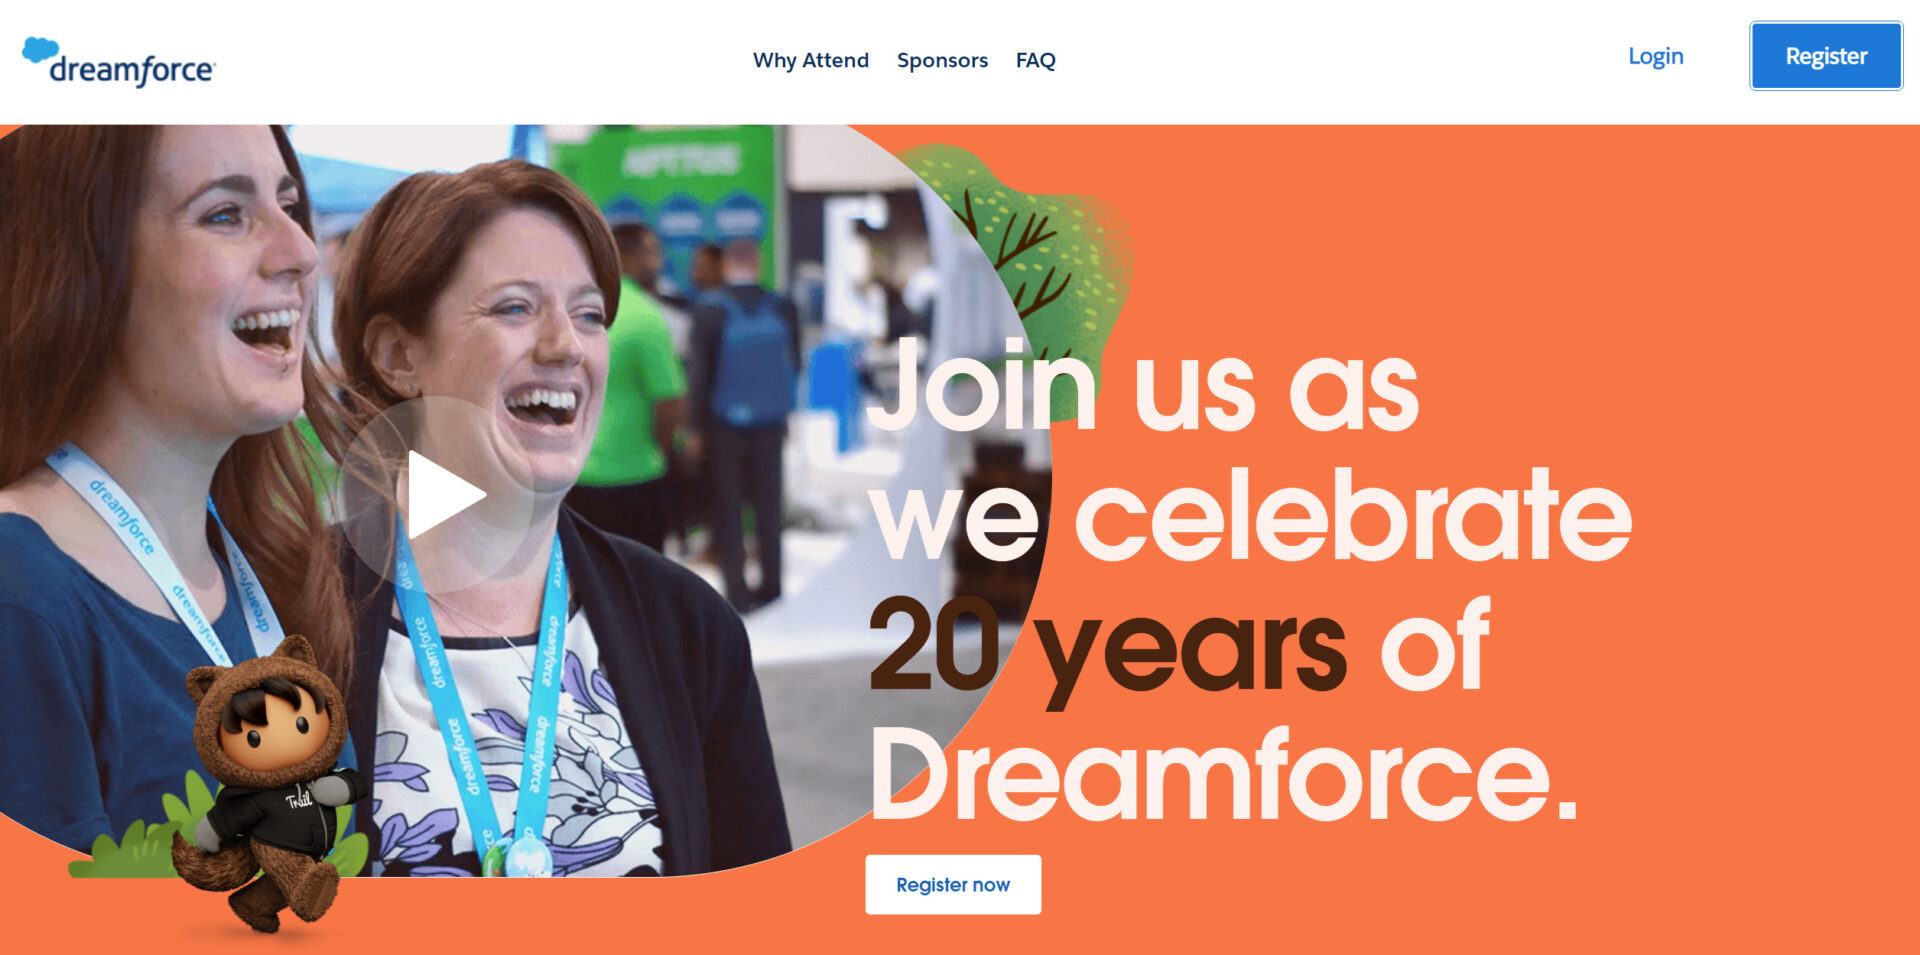 Even though Dream force, the largest software conference in the worl